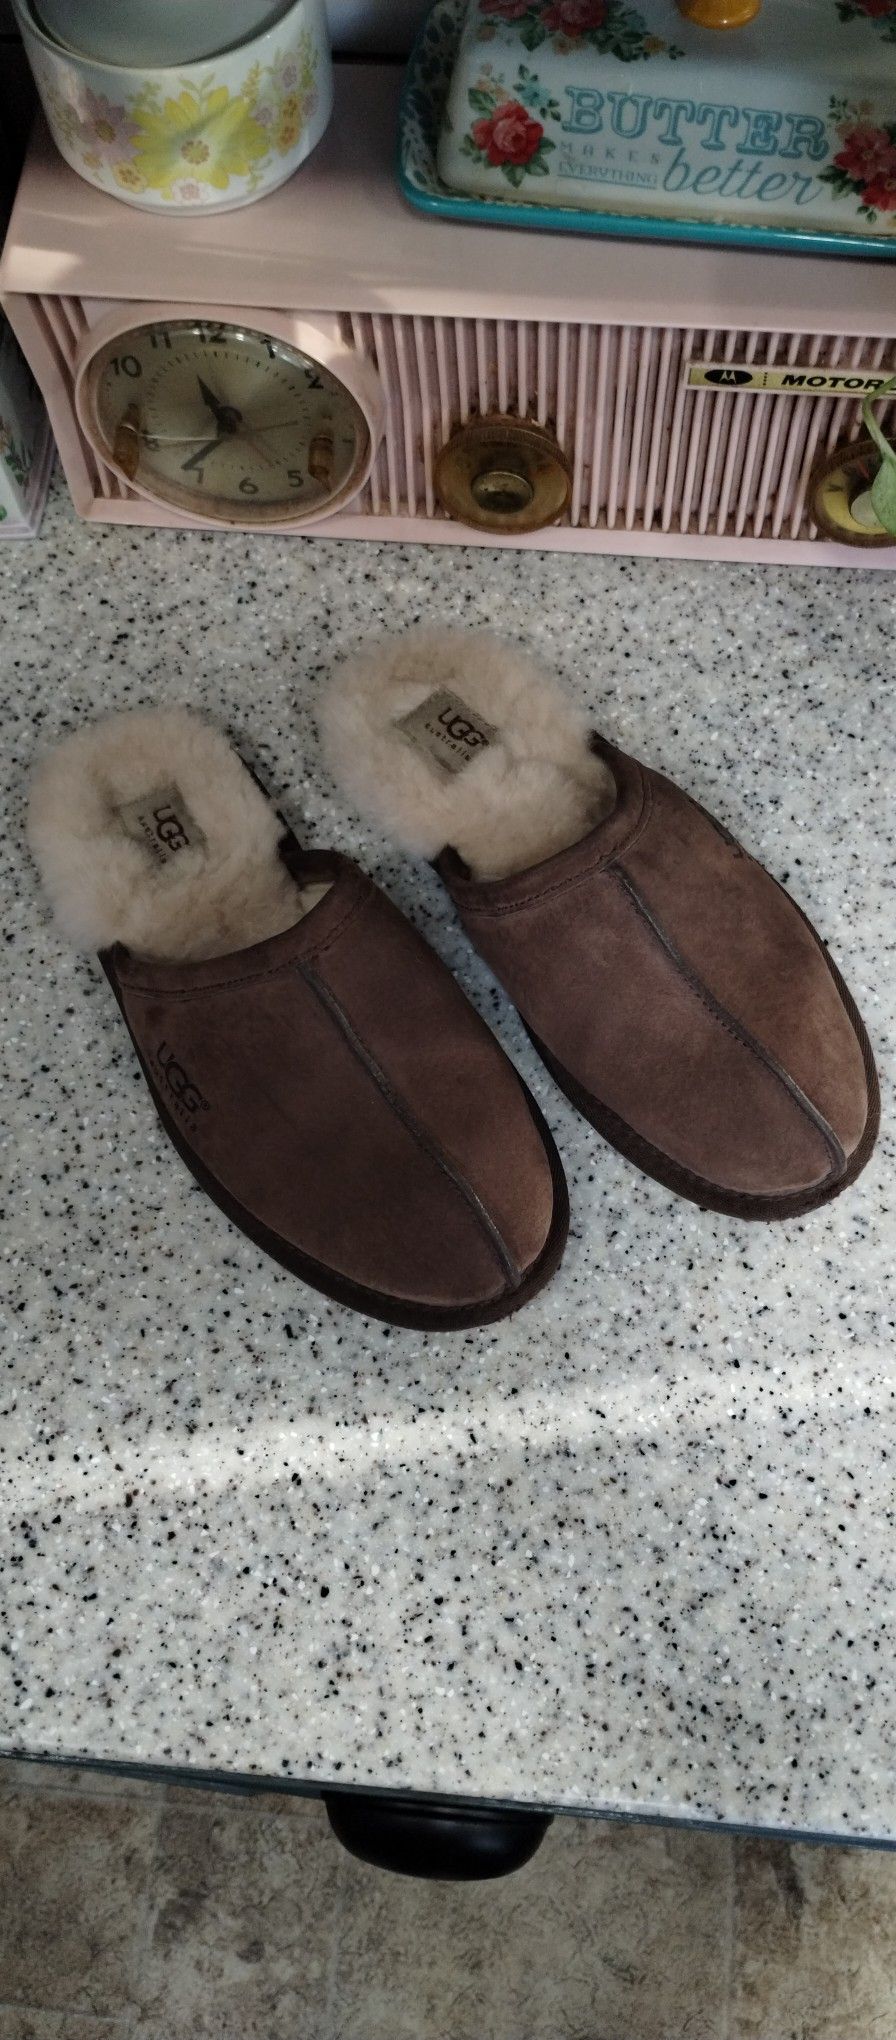 UGG Mens Size 7 Slippers